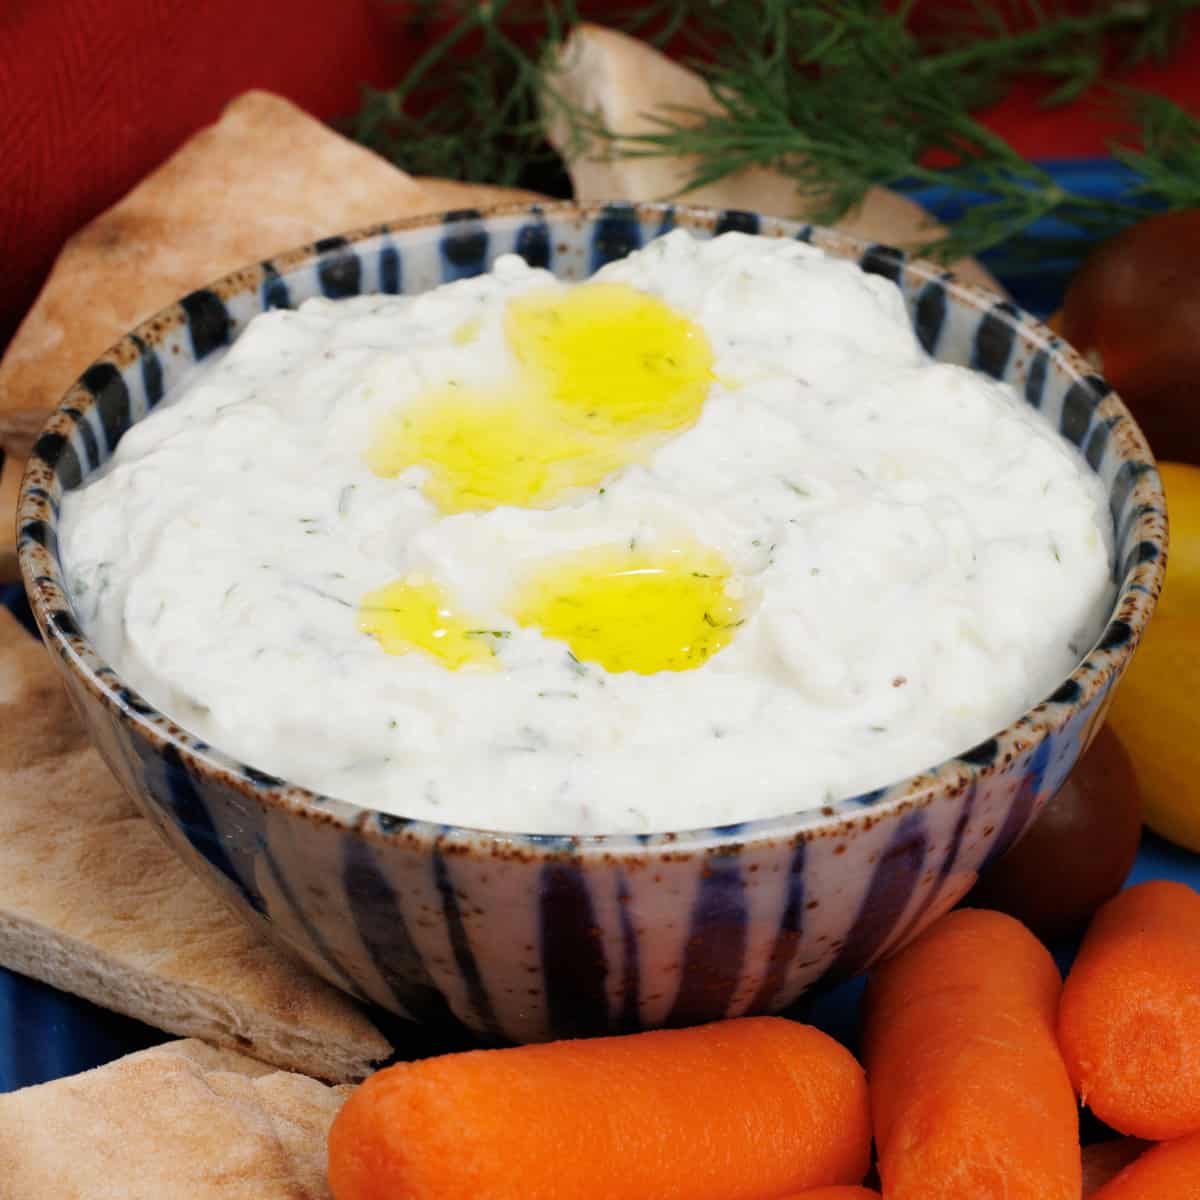 tzatziki sauce topped with olive oil surrounded by pita bread, carrots, and a red napkin